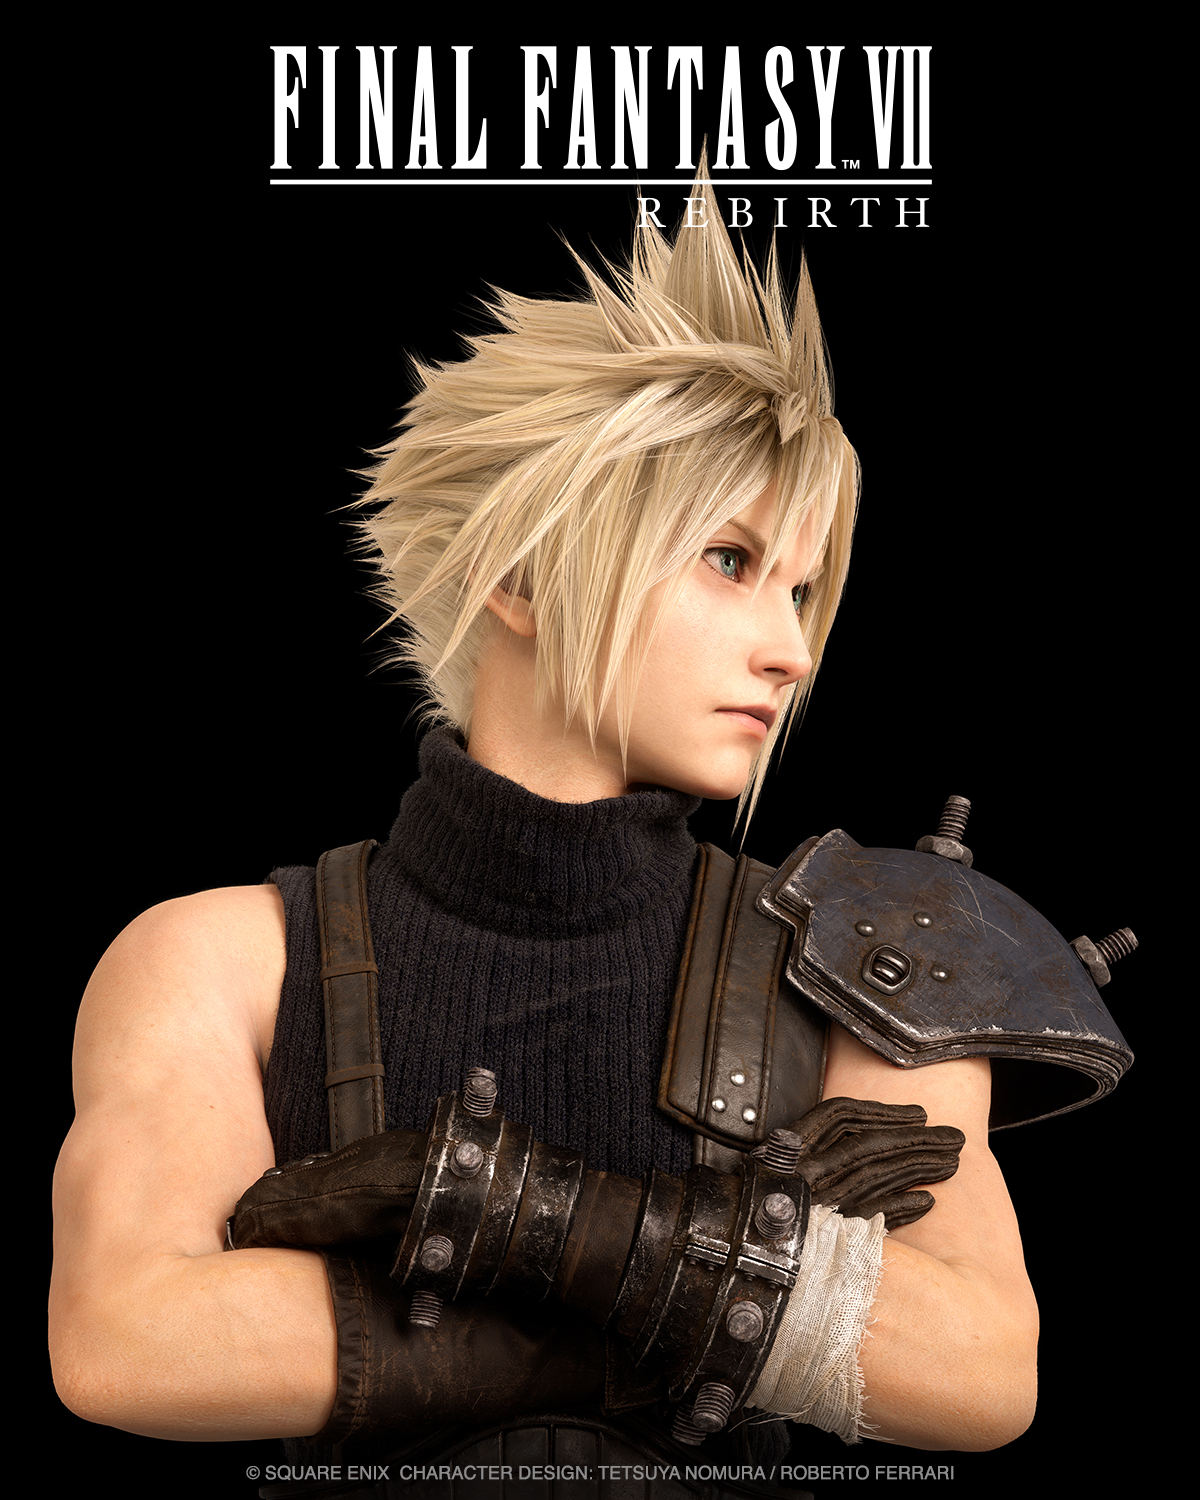 State of Play for September 2023 announced following FF7 Rebirth tease